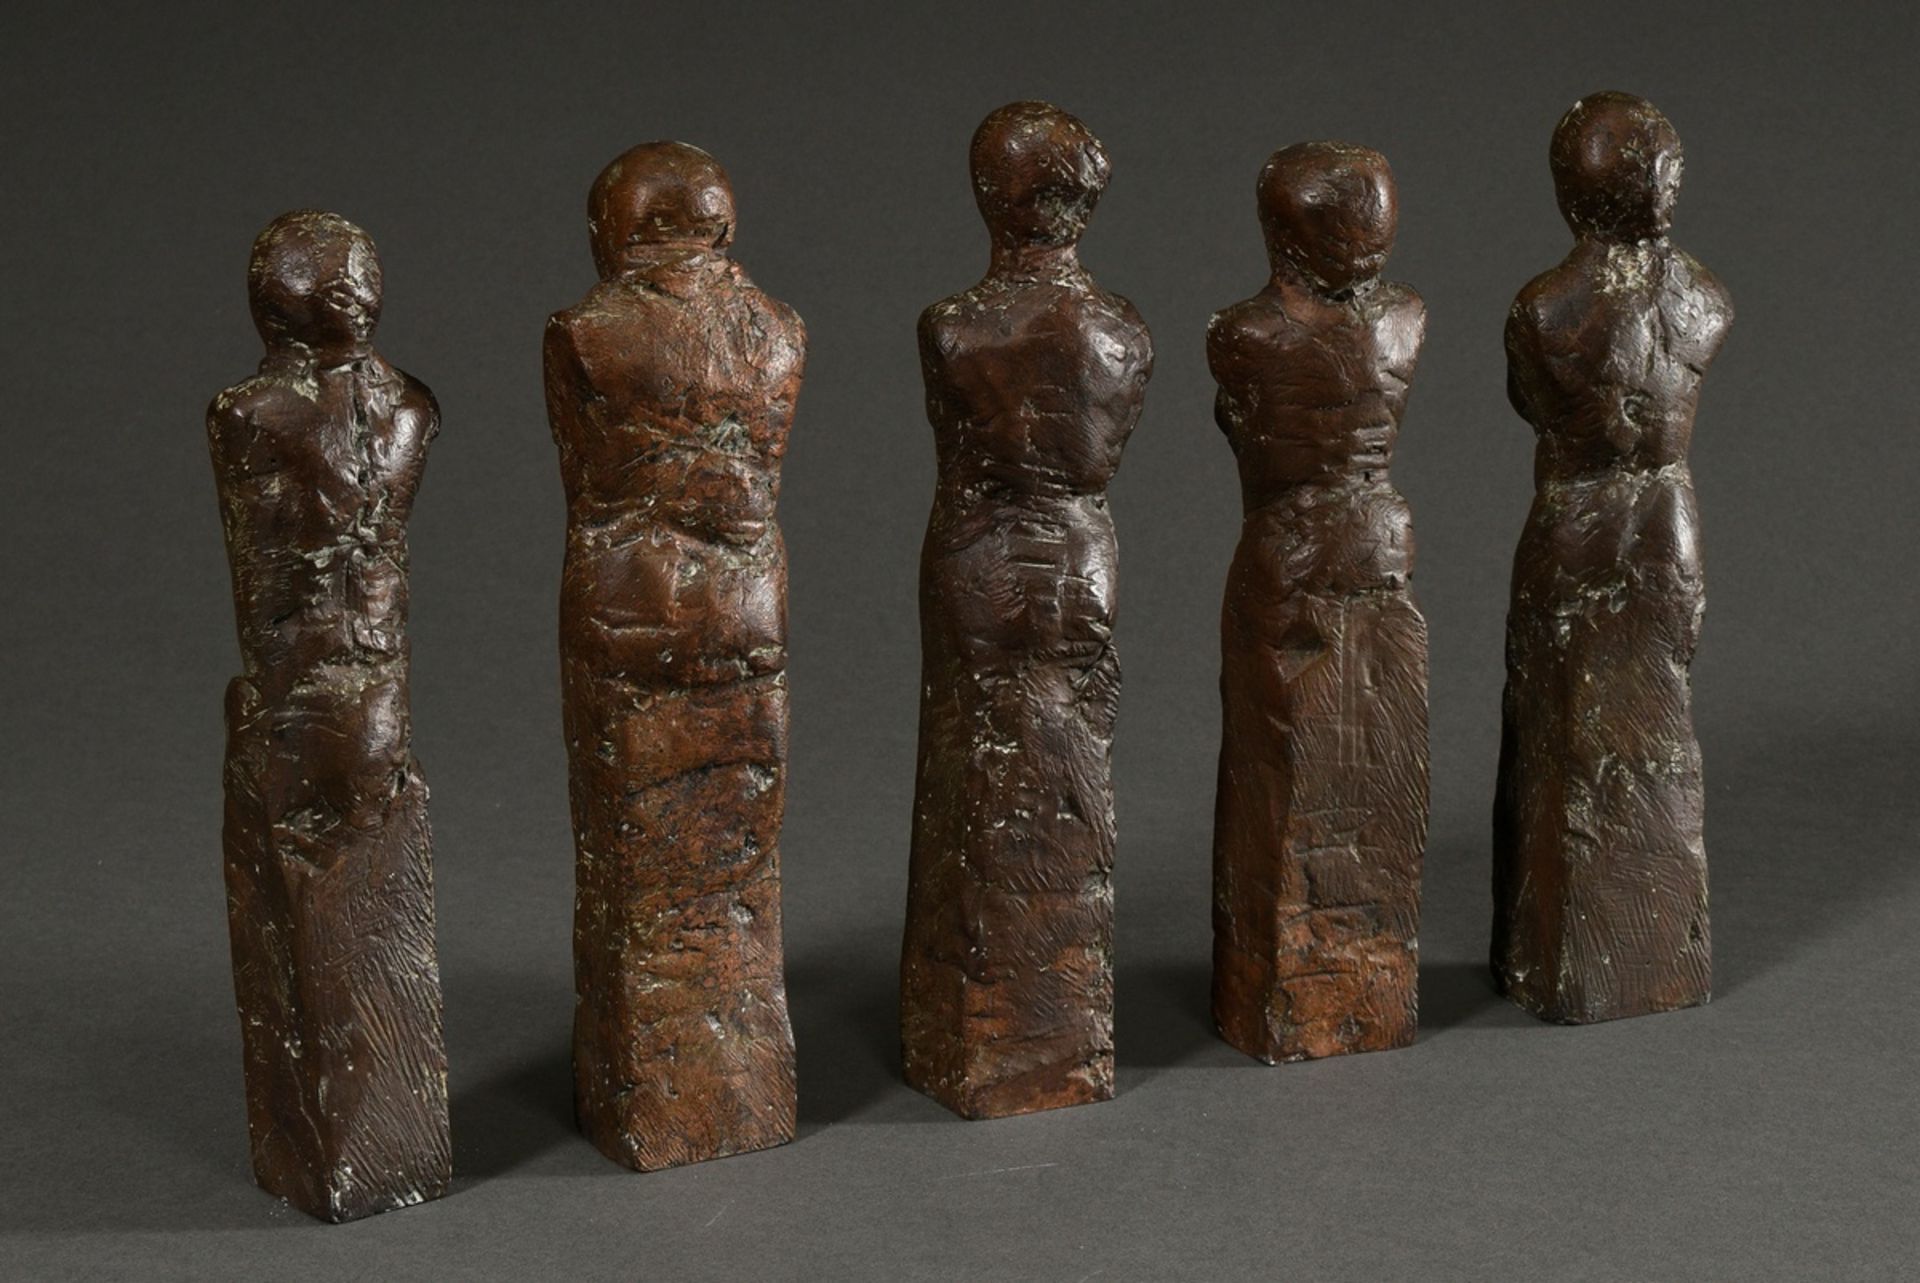 Otto, Waldemar (1929-2020) "5 Torsi", group of 5 small sculptures: 3 female and 2 male torsos, c. 1 - Image 2 of 5